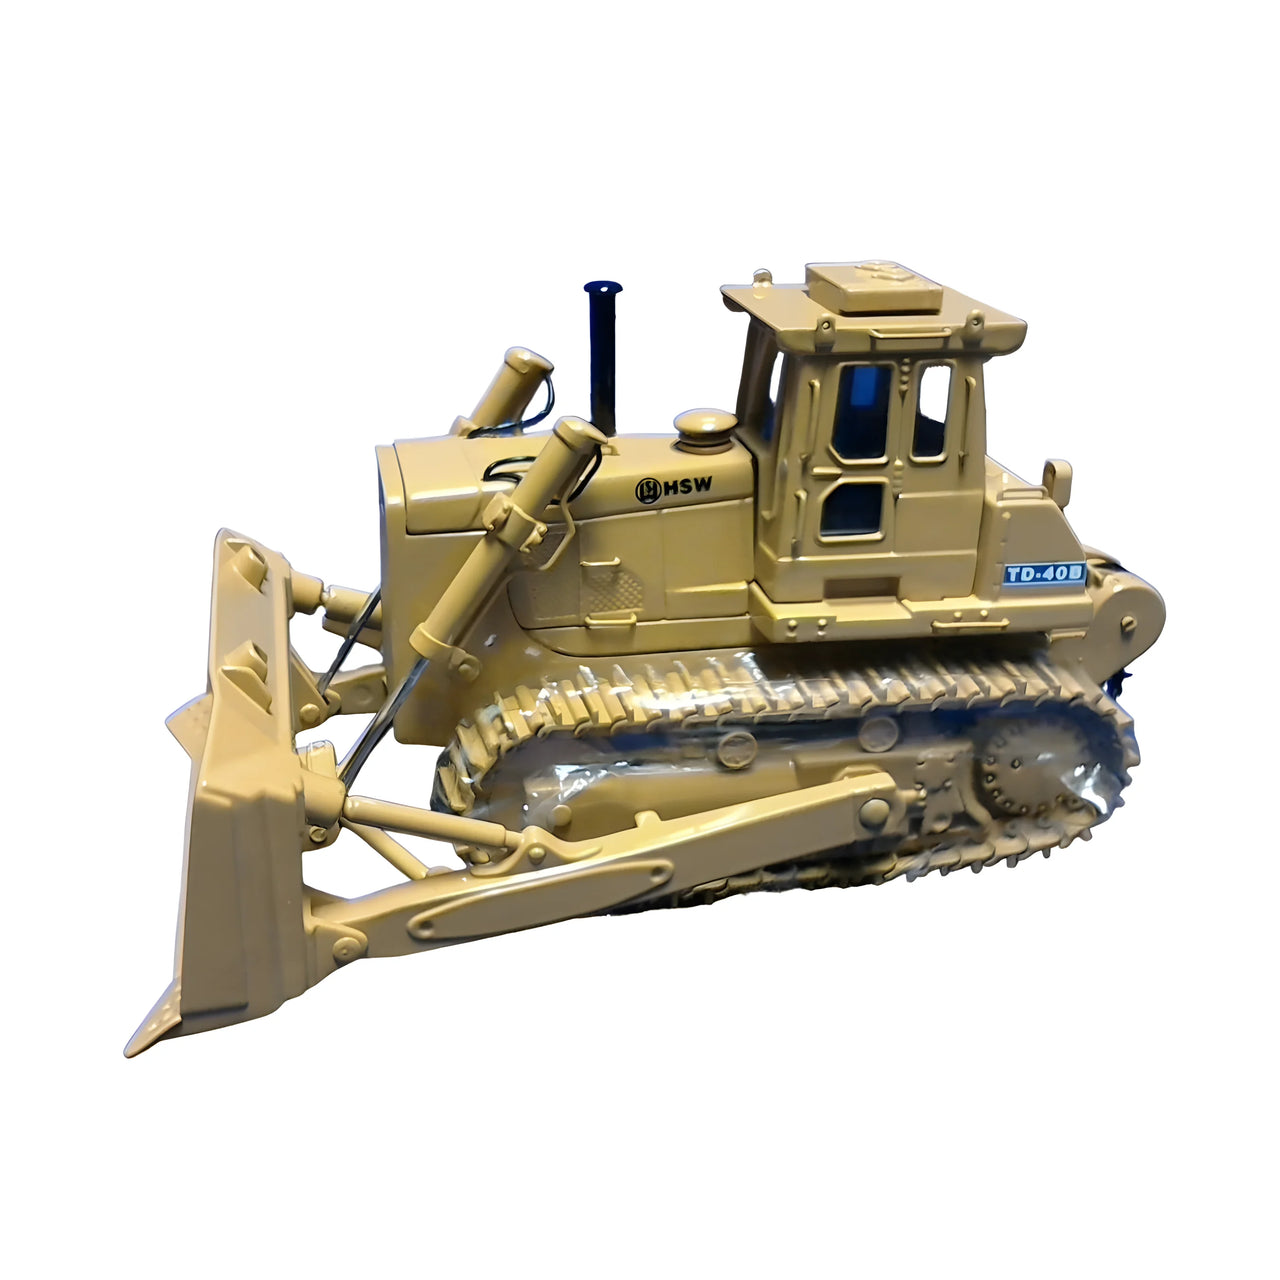 CCMTD-40BHSW HSW TD-40B Crawler Tractor Scale 1:48 (Discontinued Model)